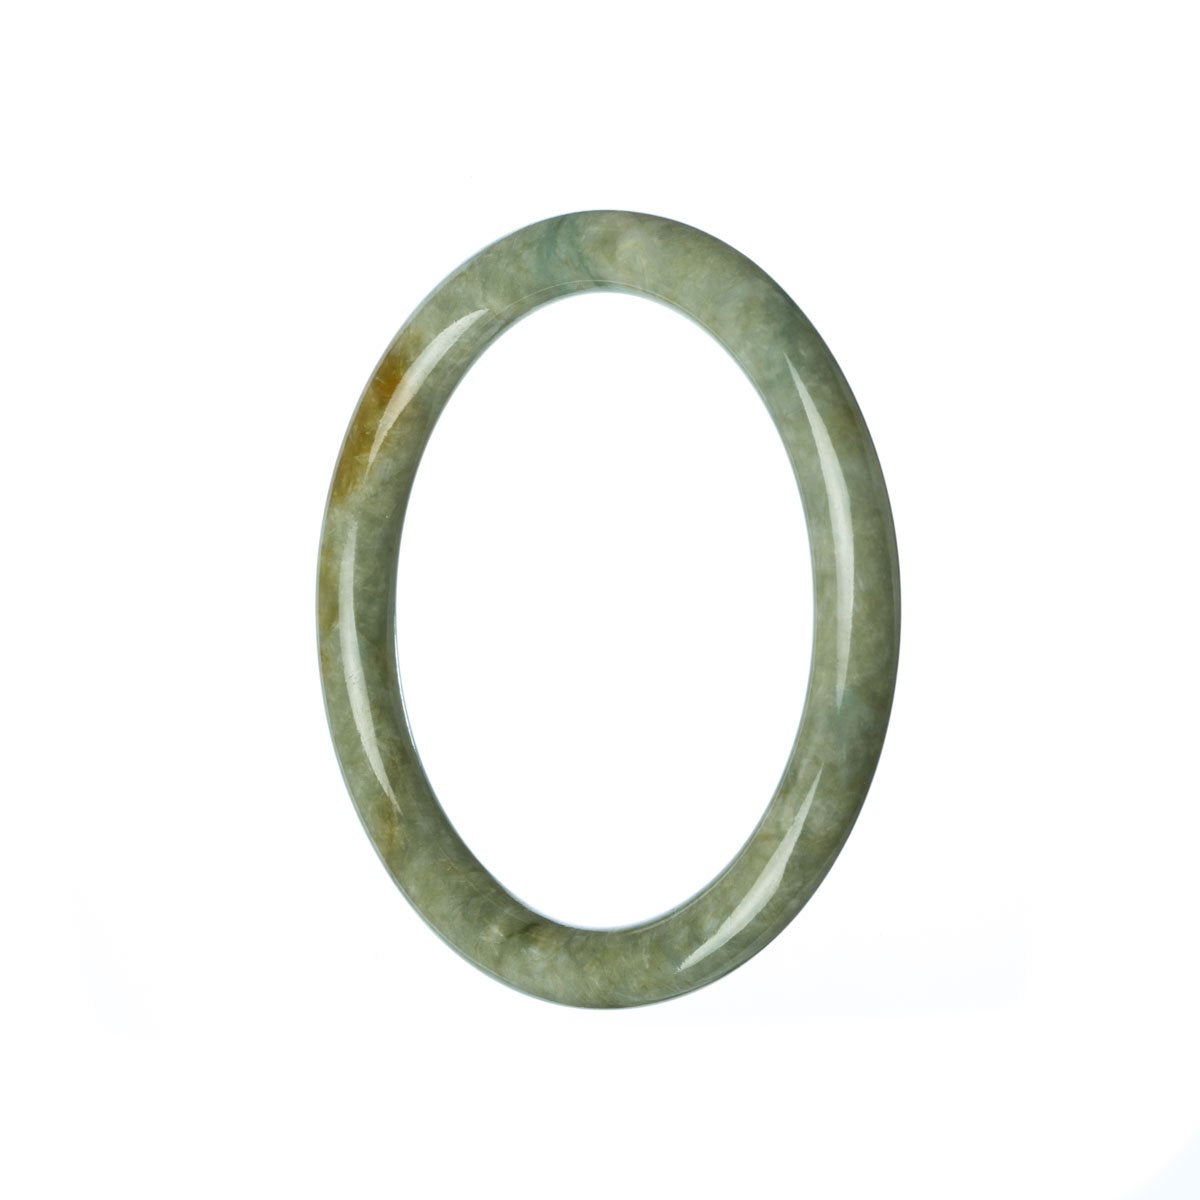 A close-up image of a petite round jade bracelet, showcasing its rich green color and traditional design.